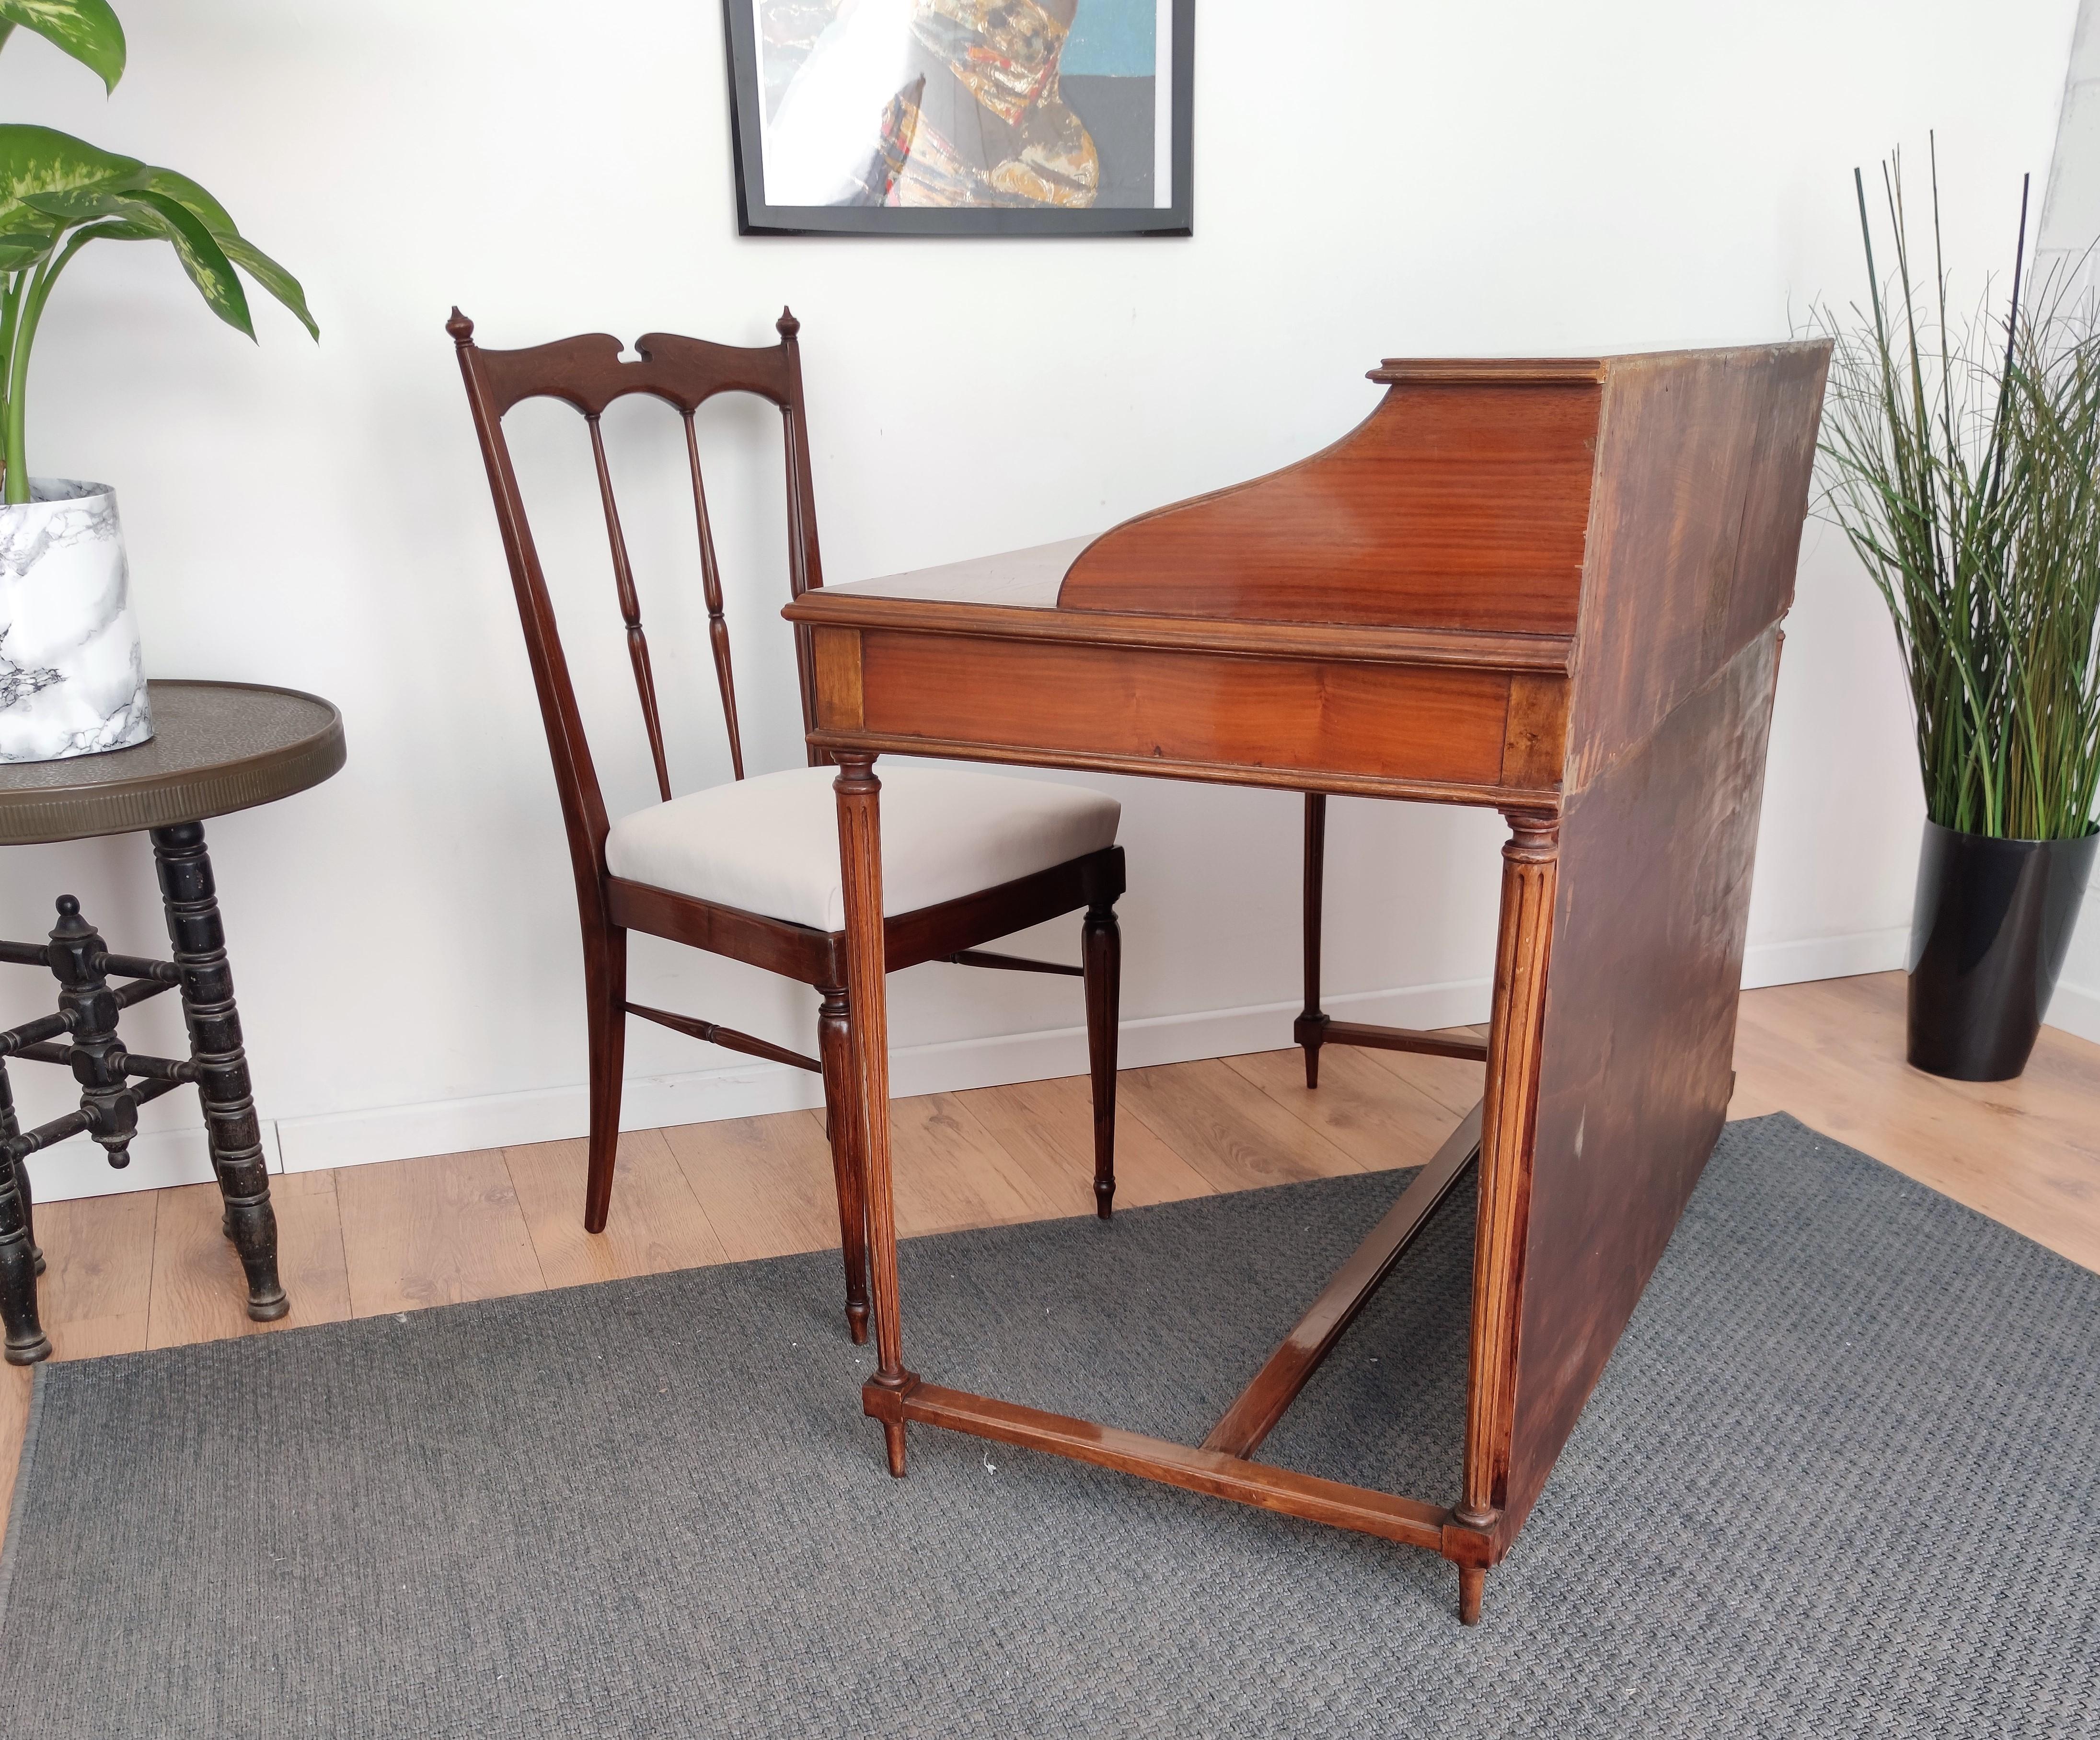 1950s Italian Mid-Century Modern Regency Desk Writing Table and Chair For Sale 6